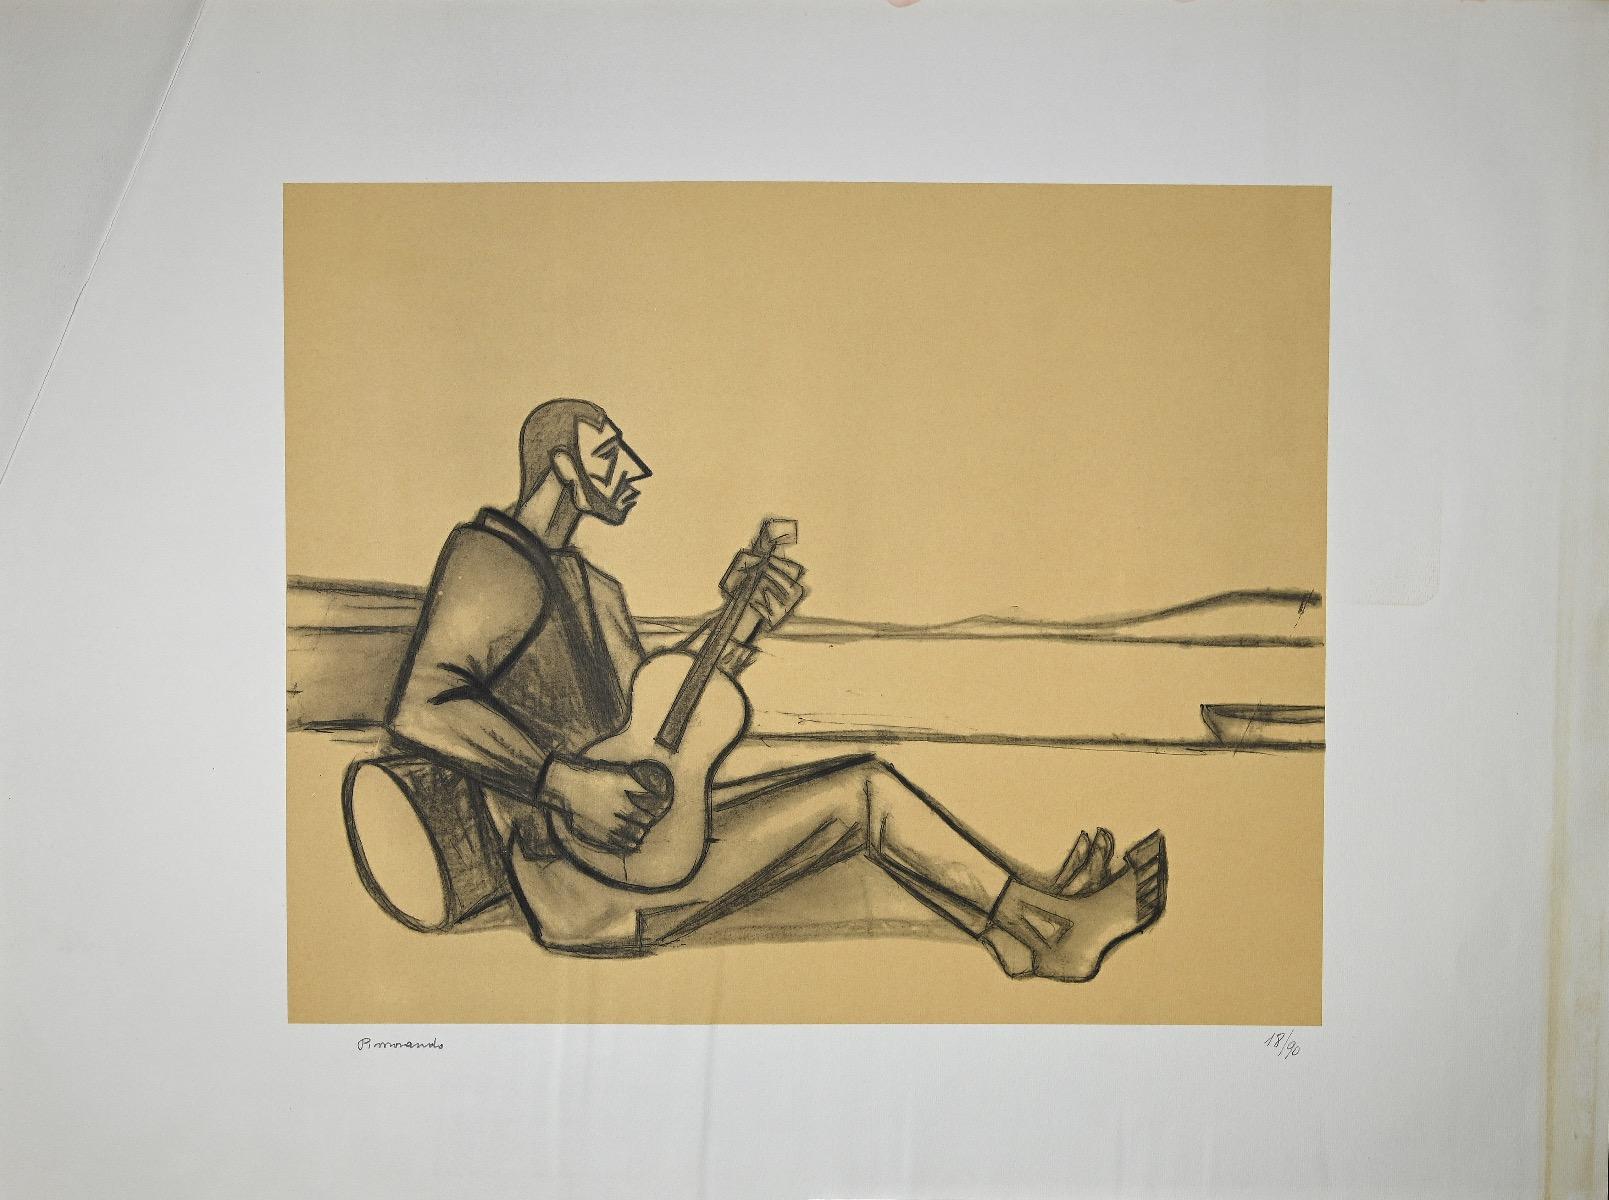 Guitarist is an original artwork realized by Italian artist Pietro Morando (Alessandria 1889- 1980).

Original Lithograph.

Hand-signed on the lower left in pencil.

Numbered on the lower right, the edition of 18/90 prints.

Very good conditions,